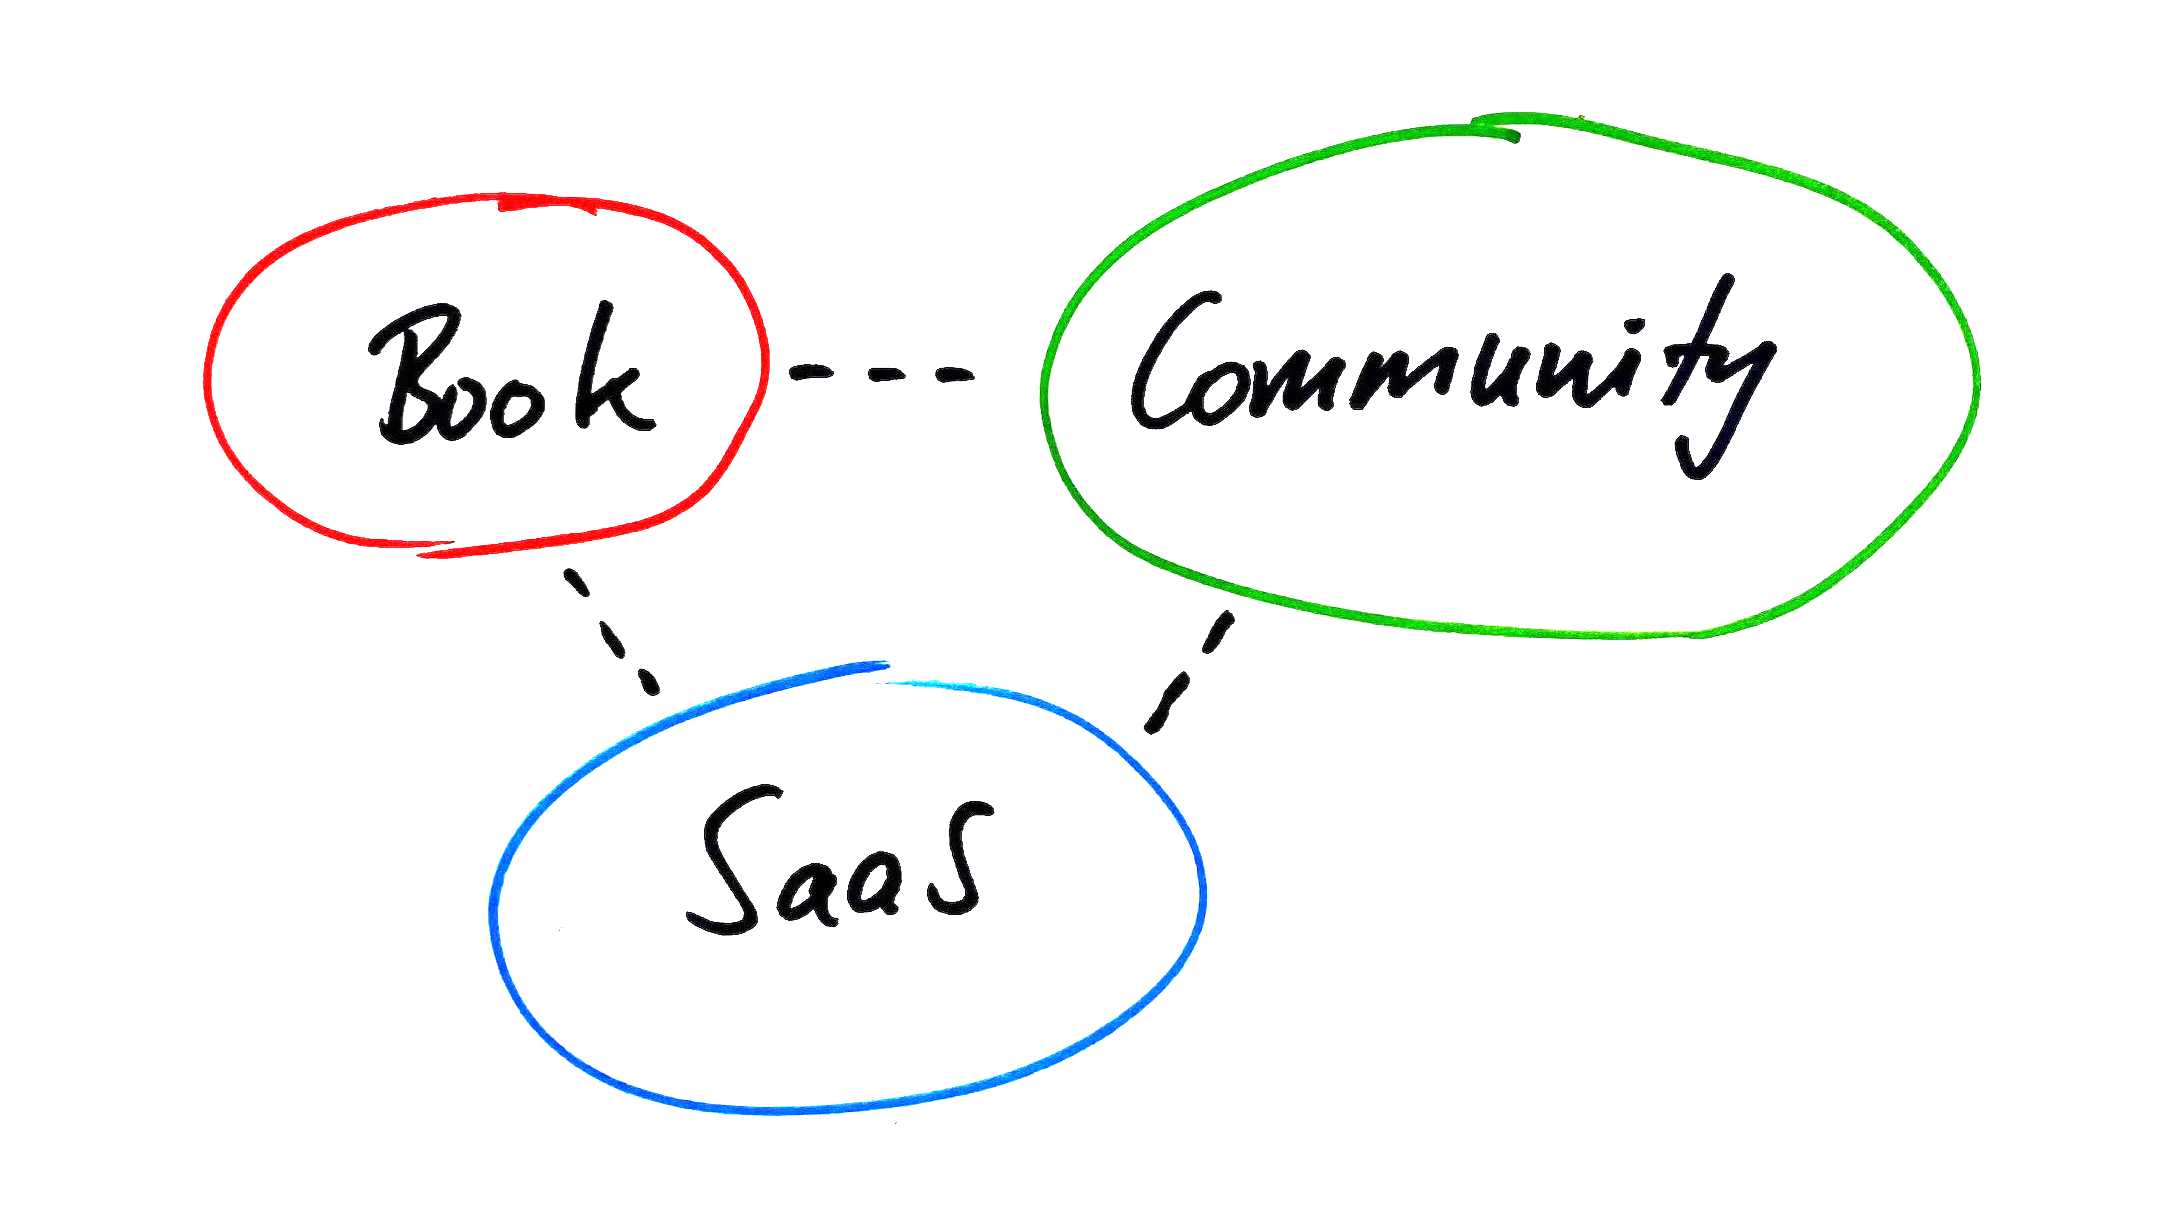 I will add a book and a community to my SaaS